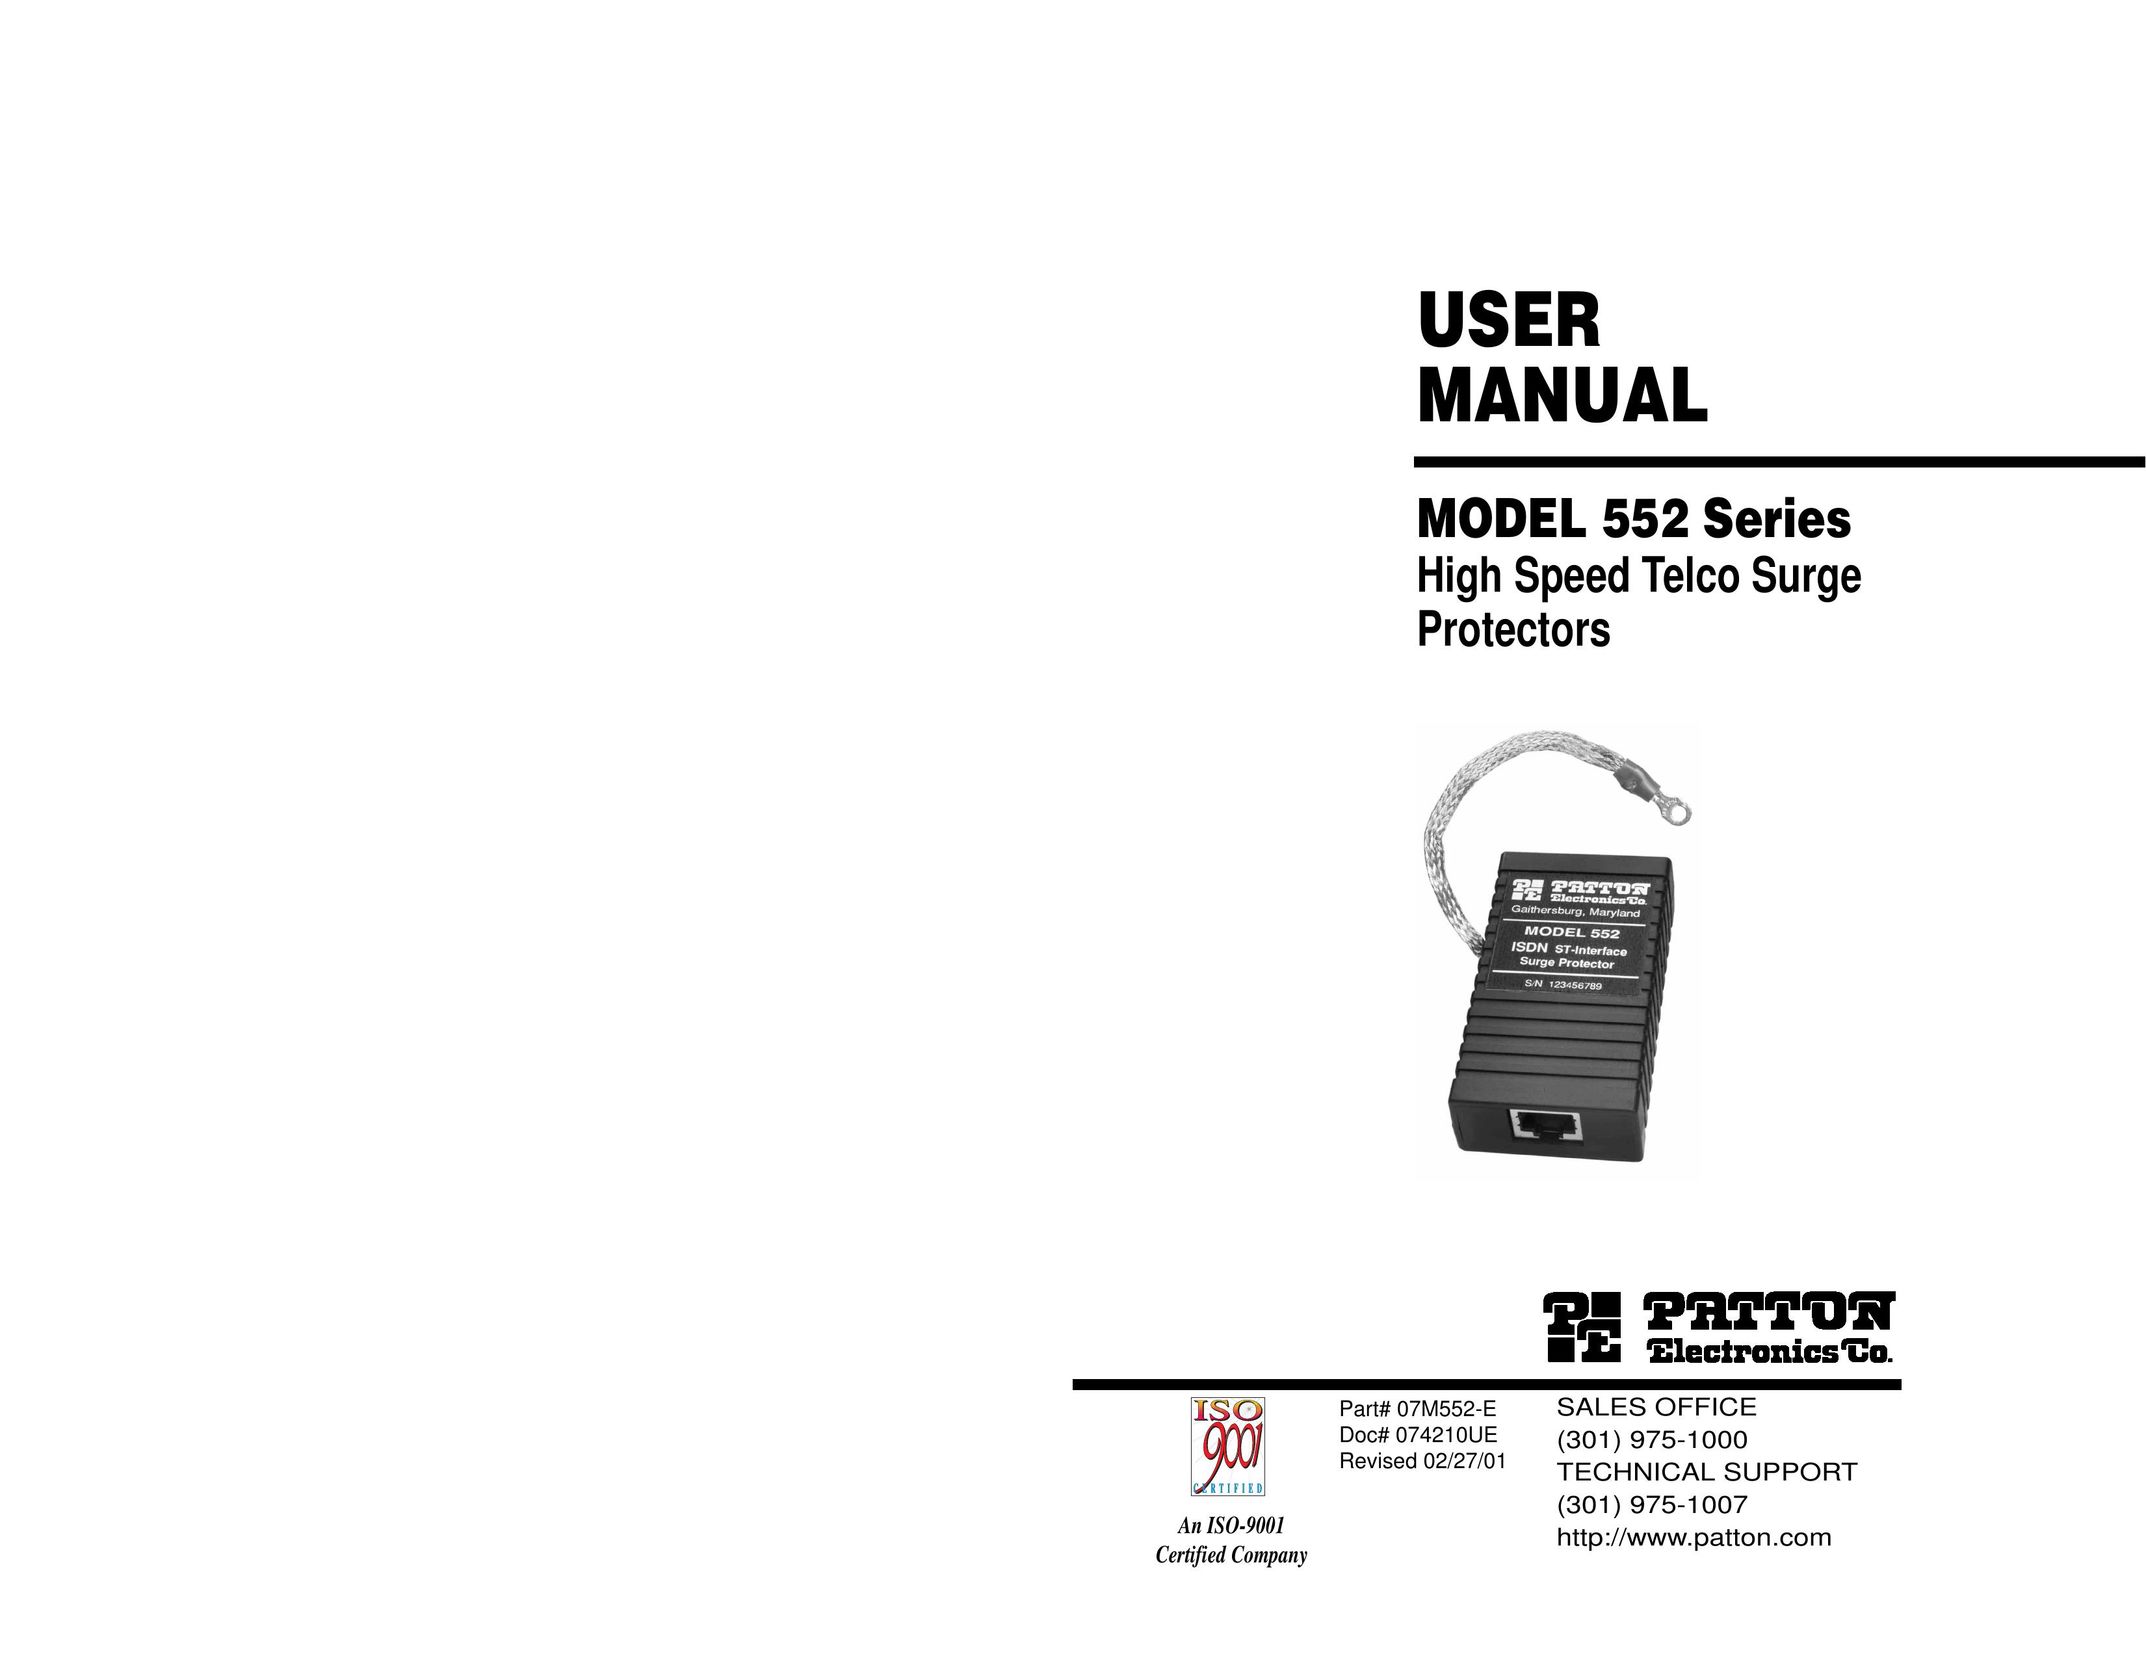 Patton electronic MODEL 552 Surge Protector User Manual